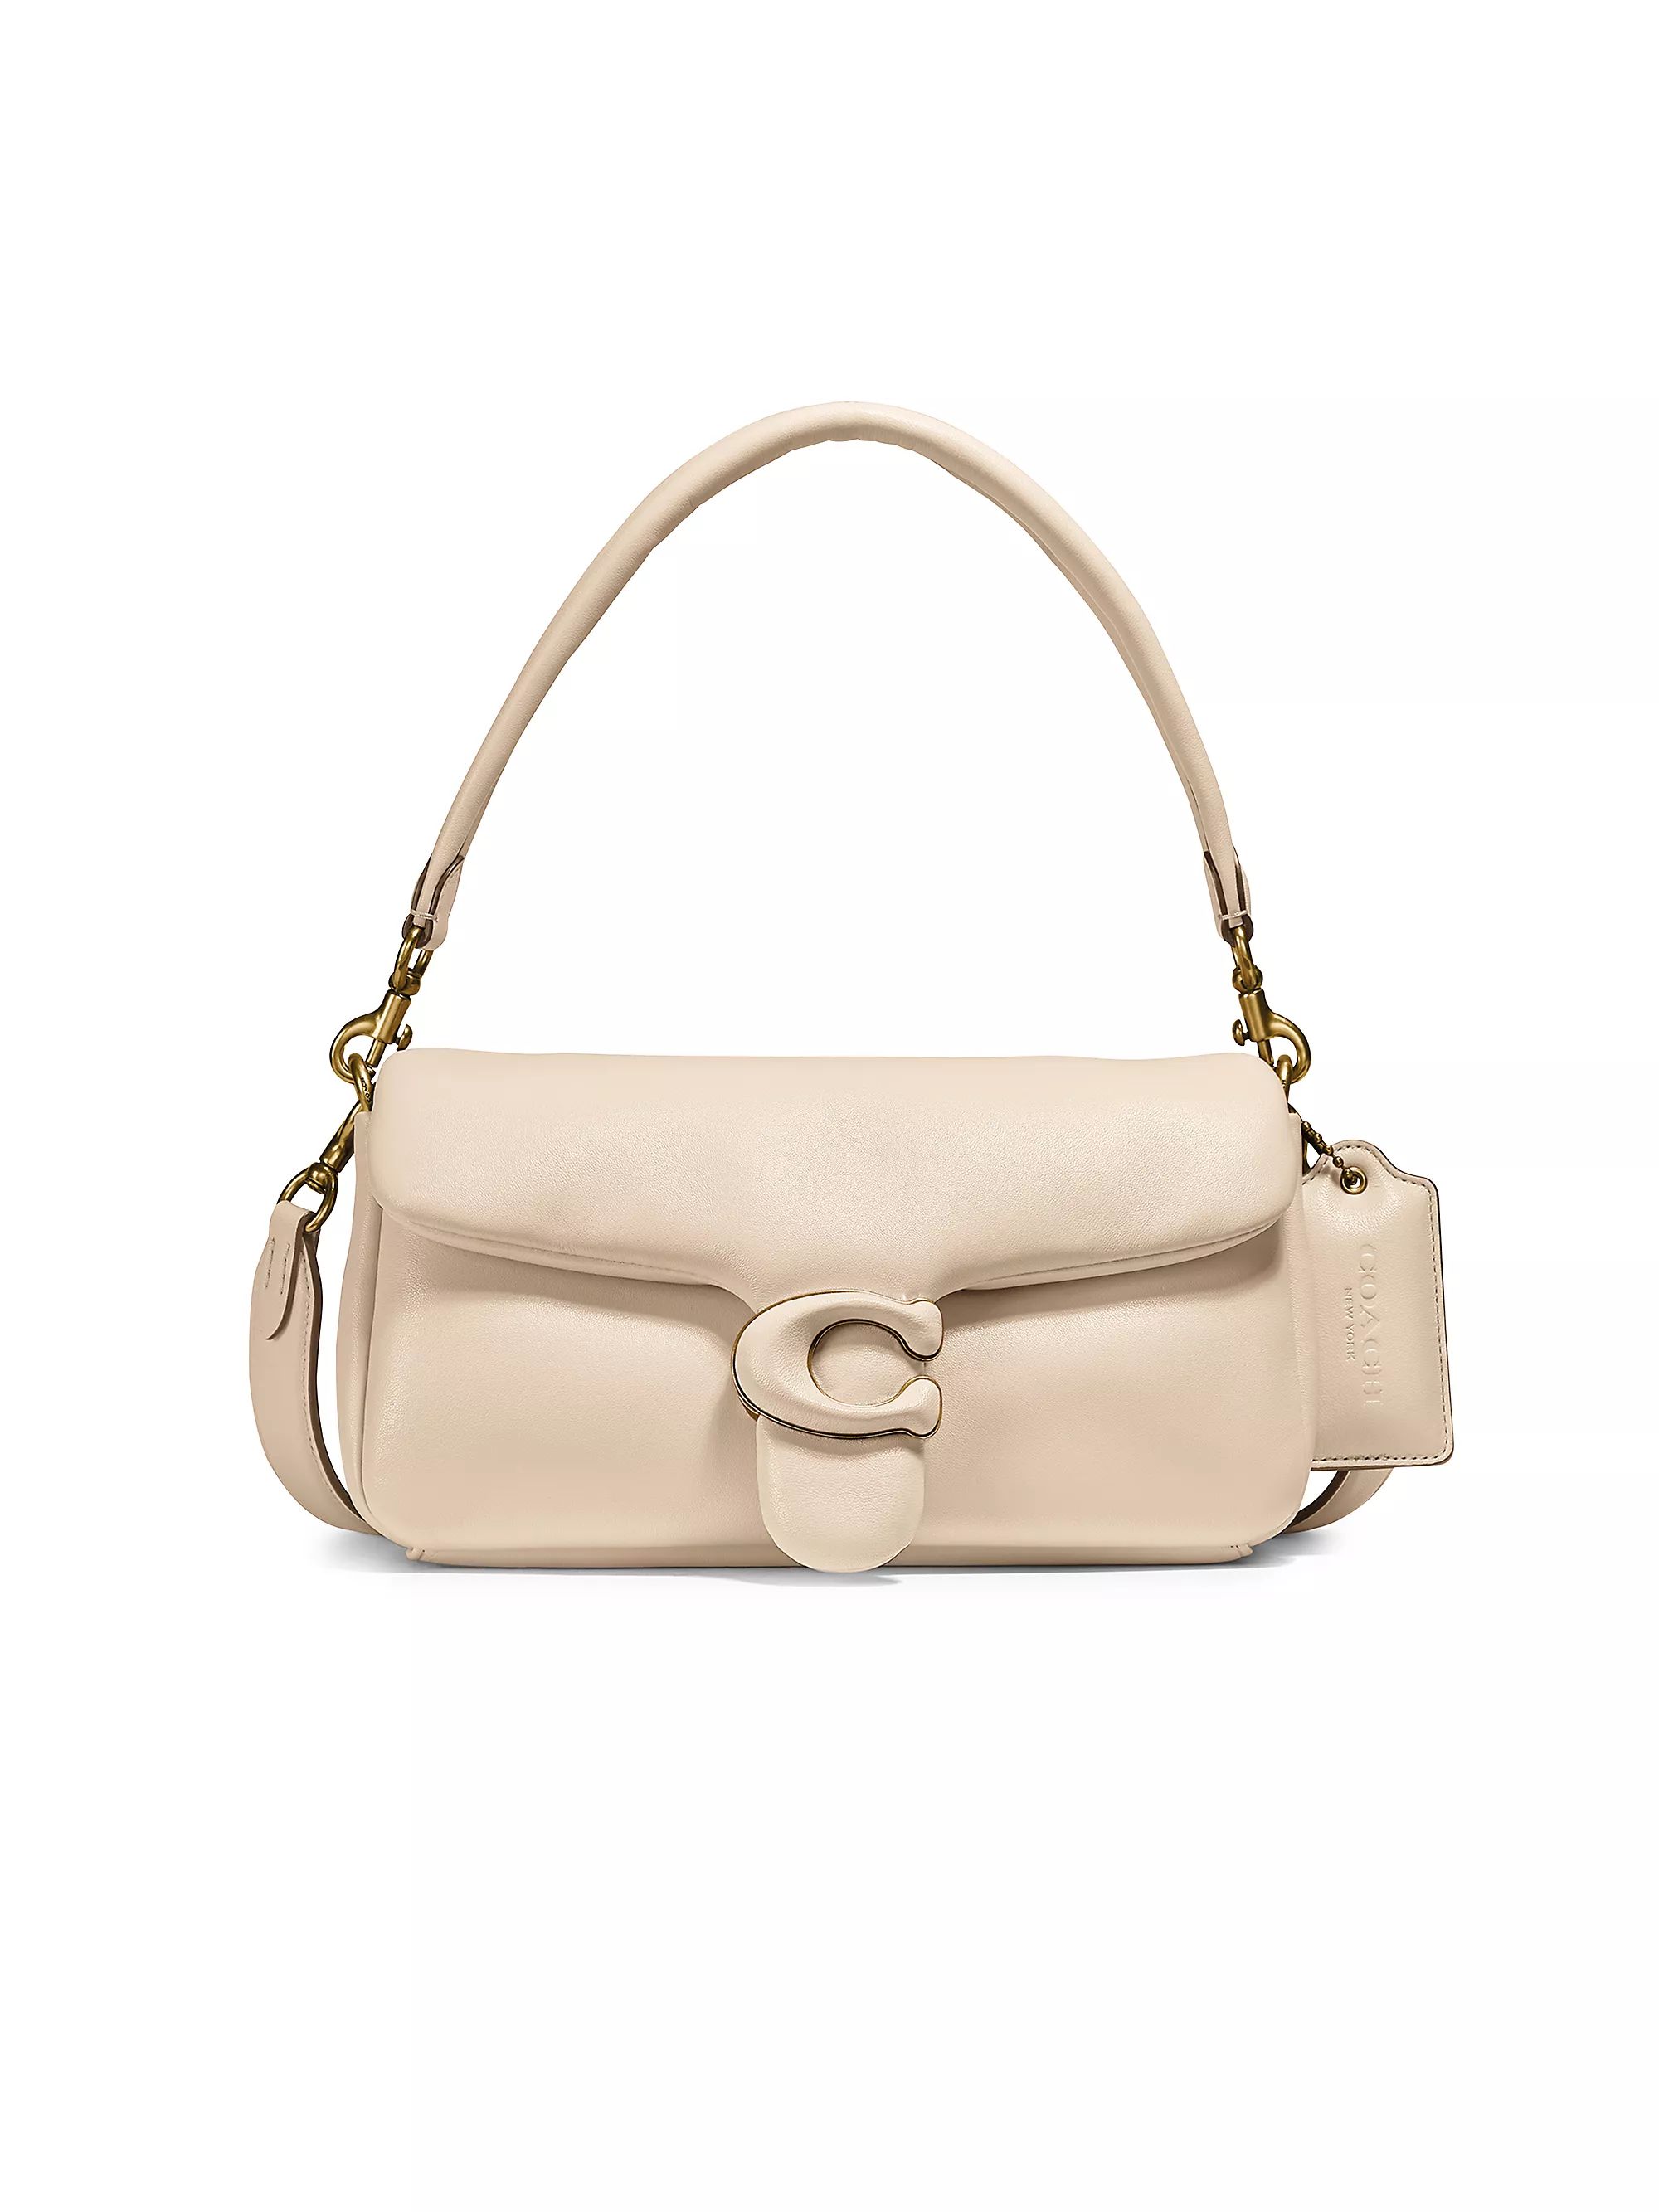 Pillow Tabby 26 Leather Shoulder Bag | Saks Fifth Avenue